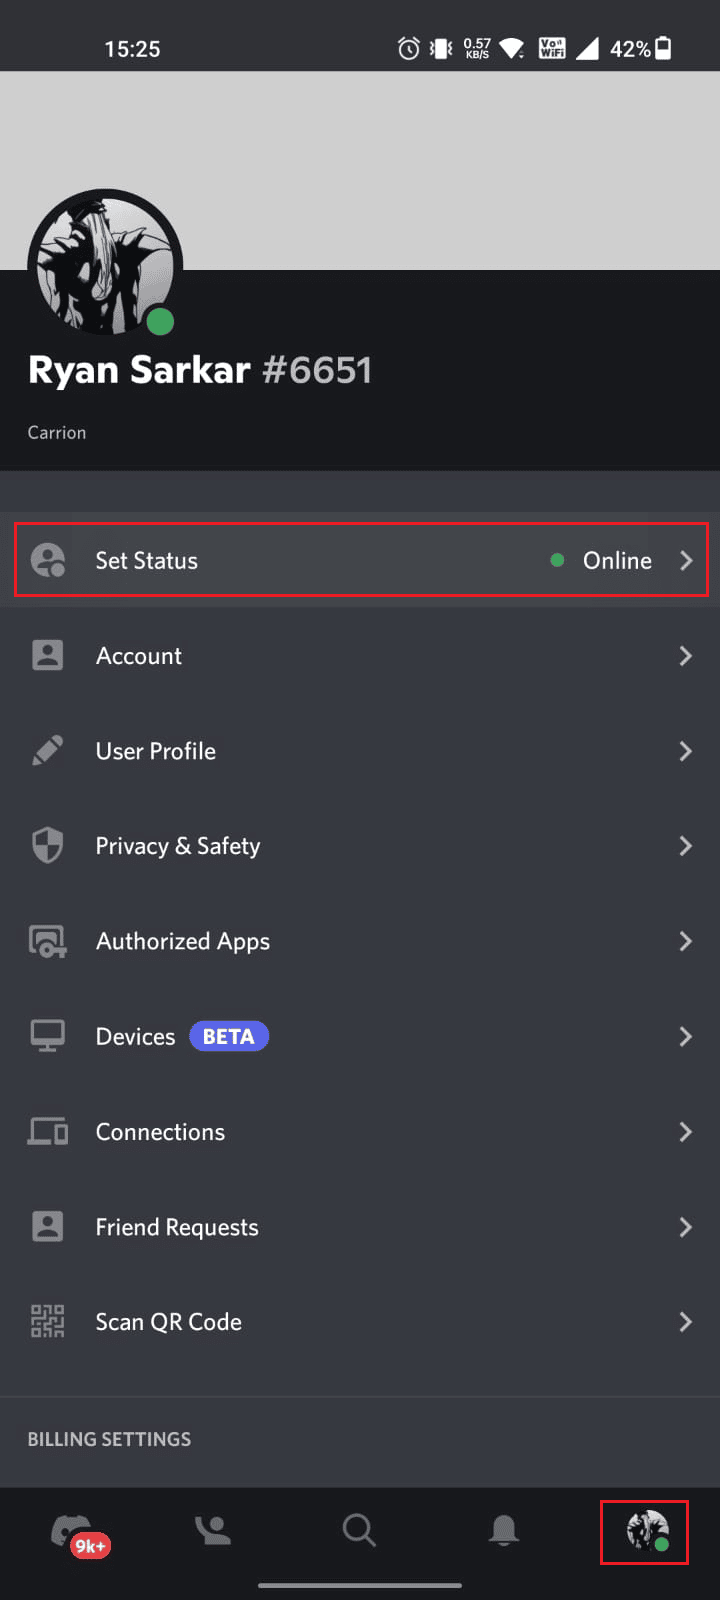 After logging in, tap on the Profile tab - Set Status